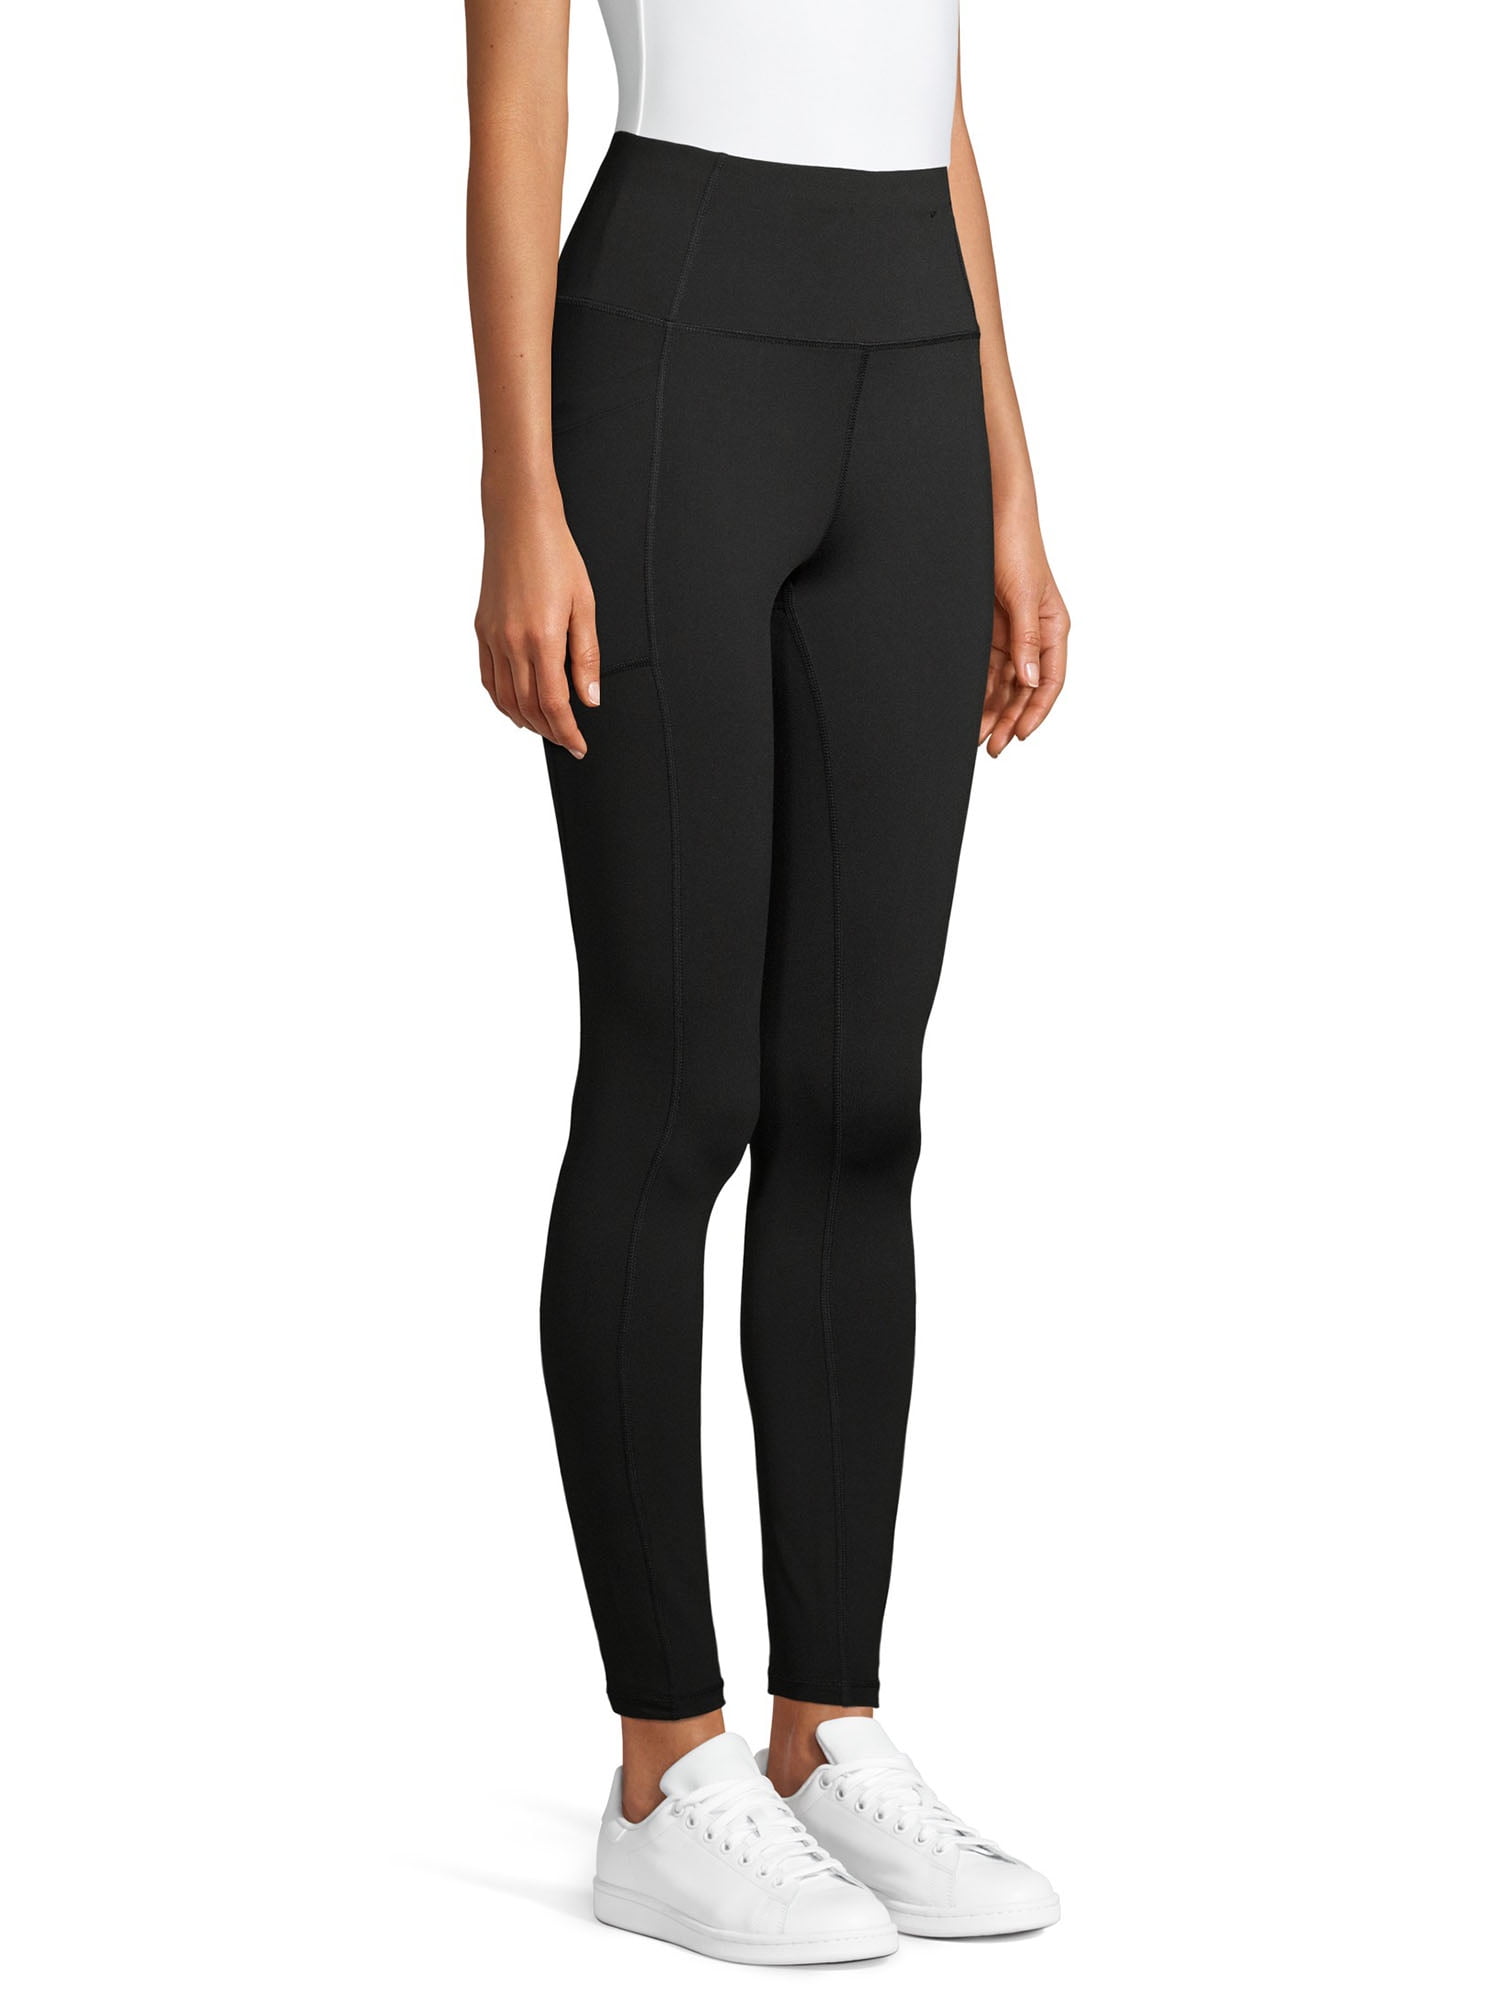 Avia Women's Performance Ankle Tights with Side Pockets 